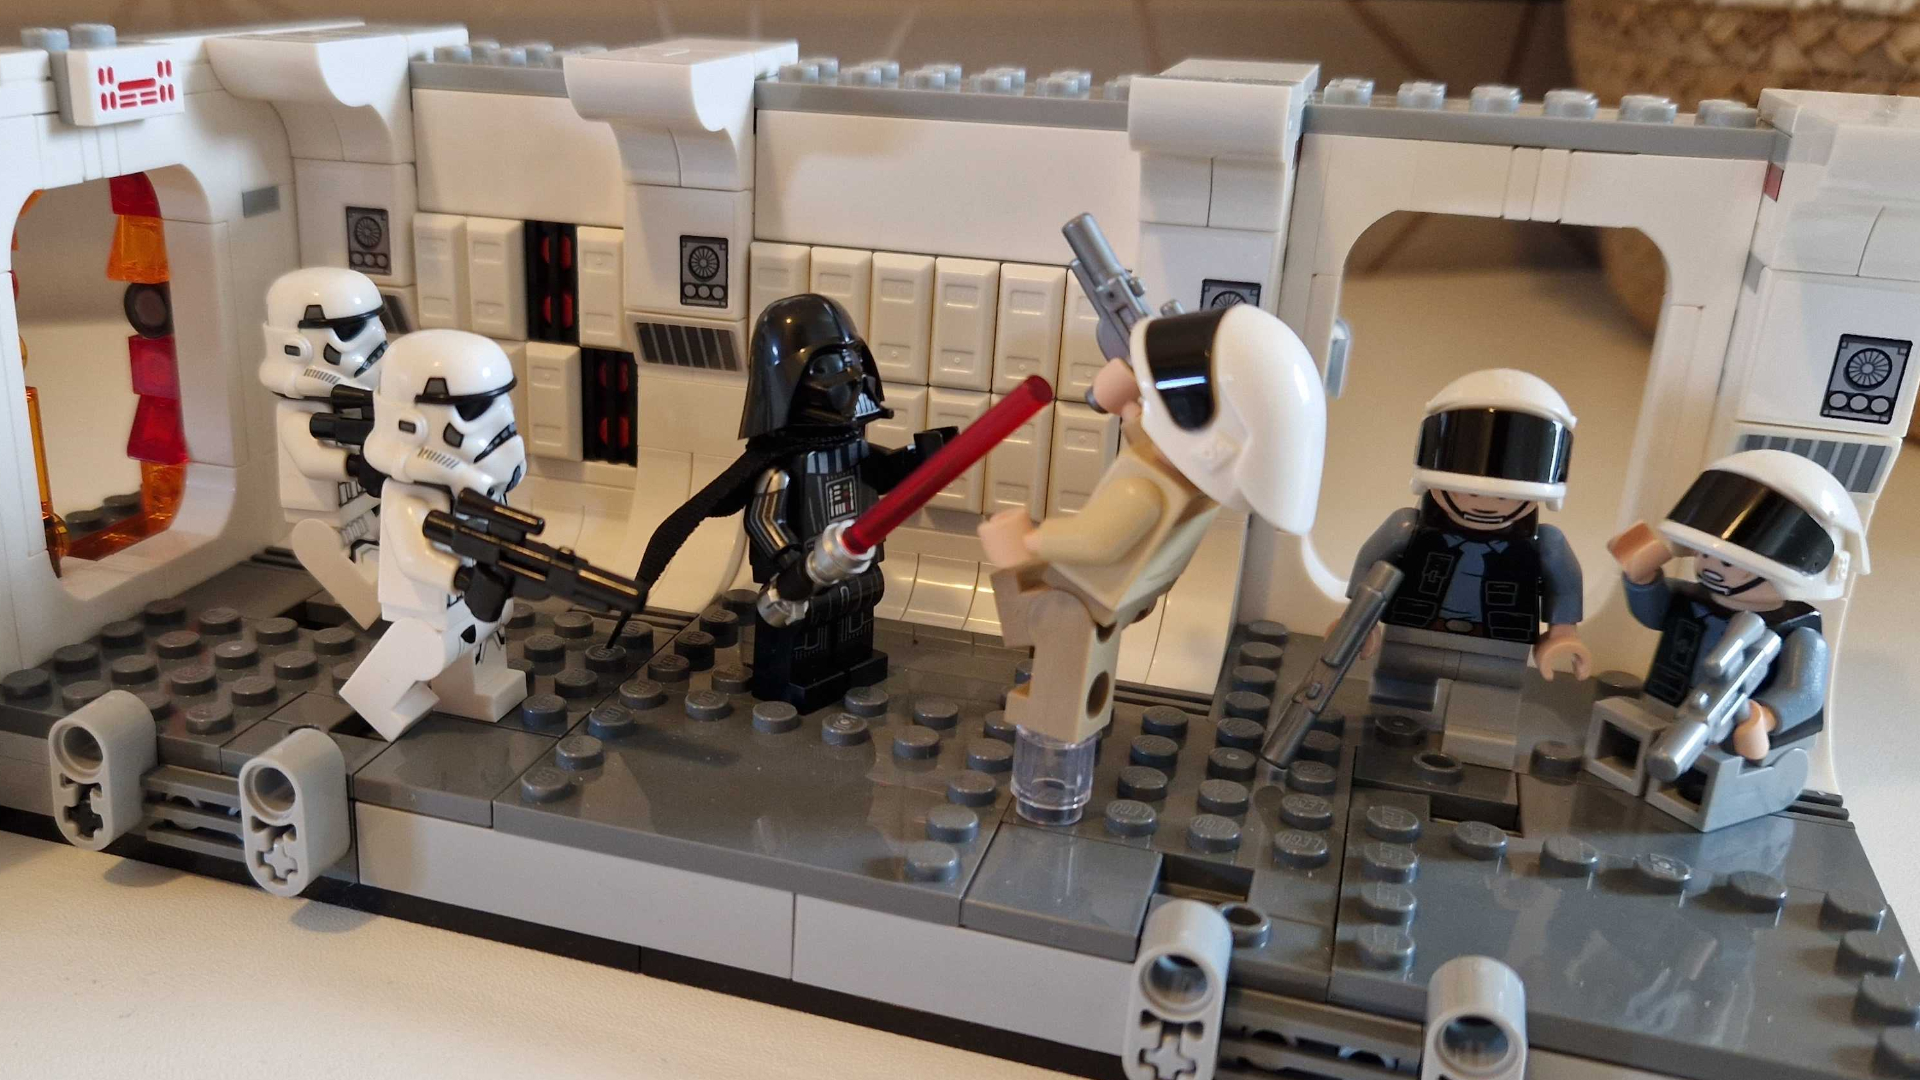 The Lego Boarding the Tantive IV set up, with Vader, Stormtroopers, and Rebels